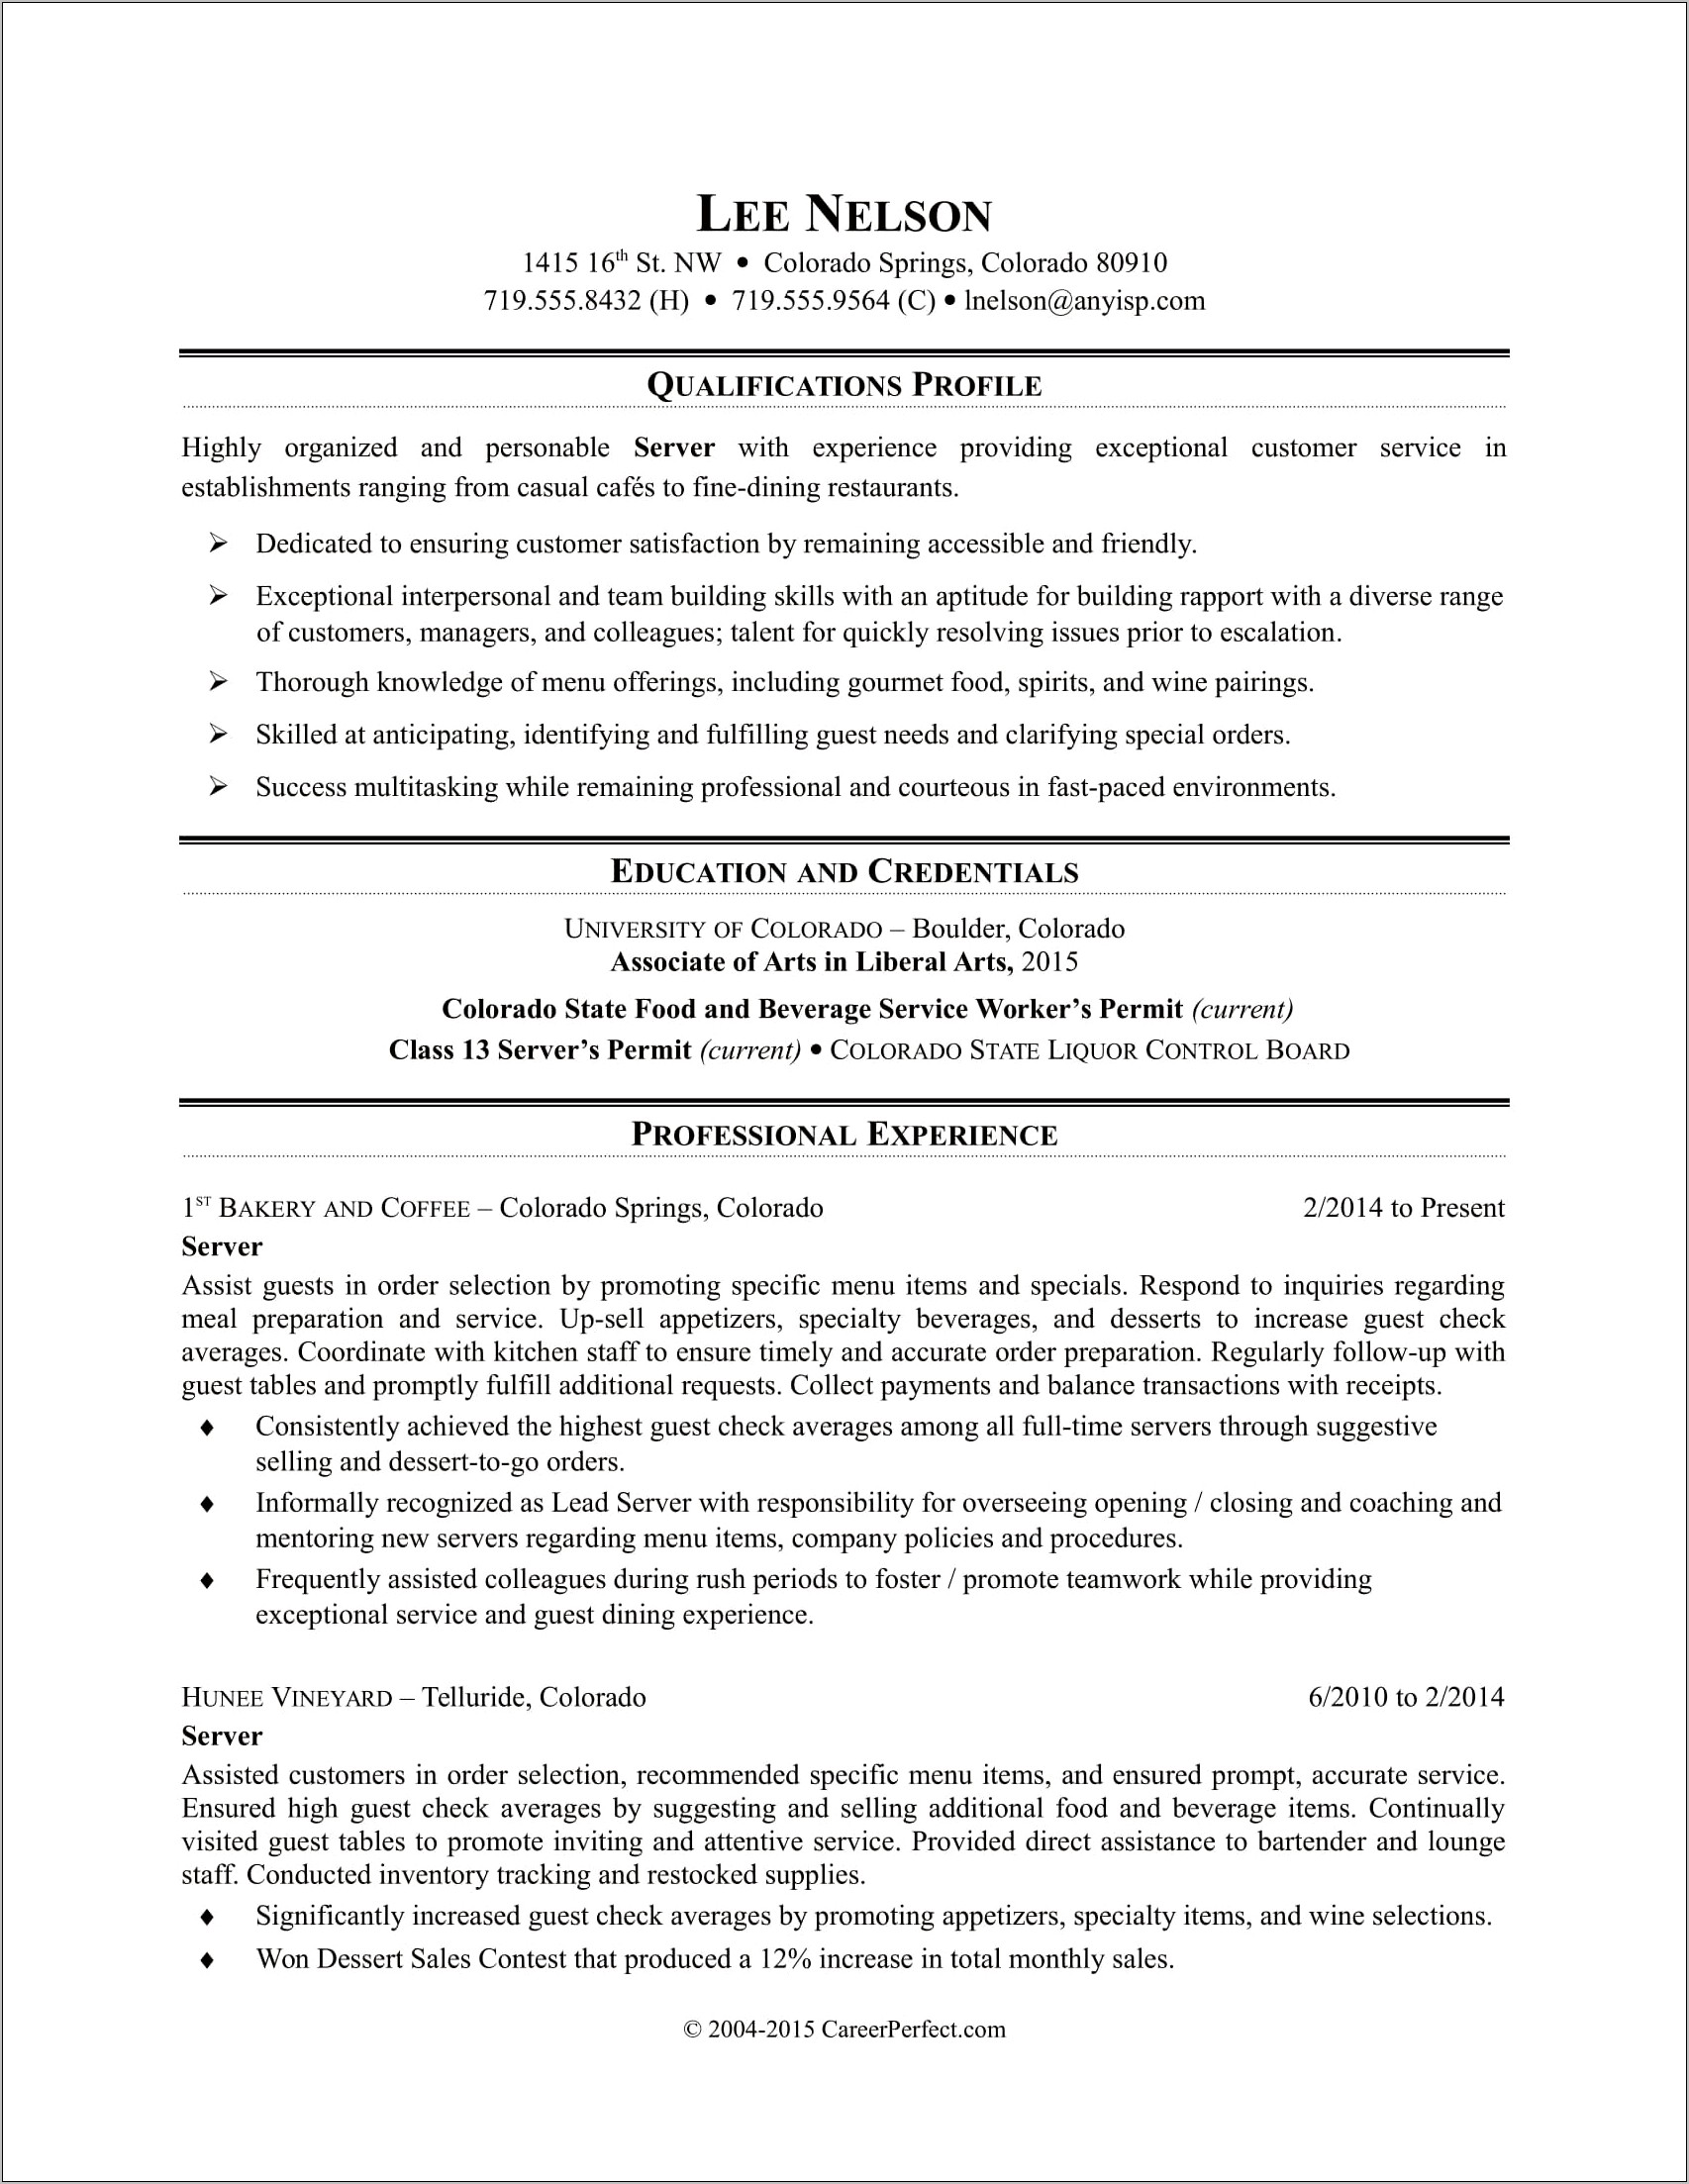 Sample Of Professional Profile For A Resume